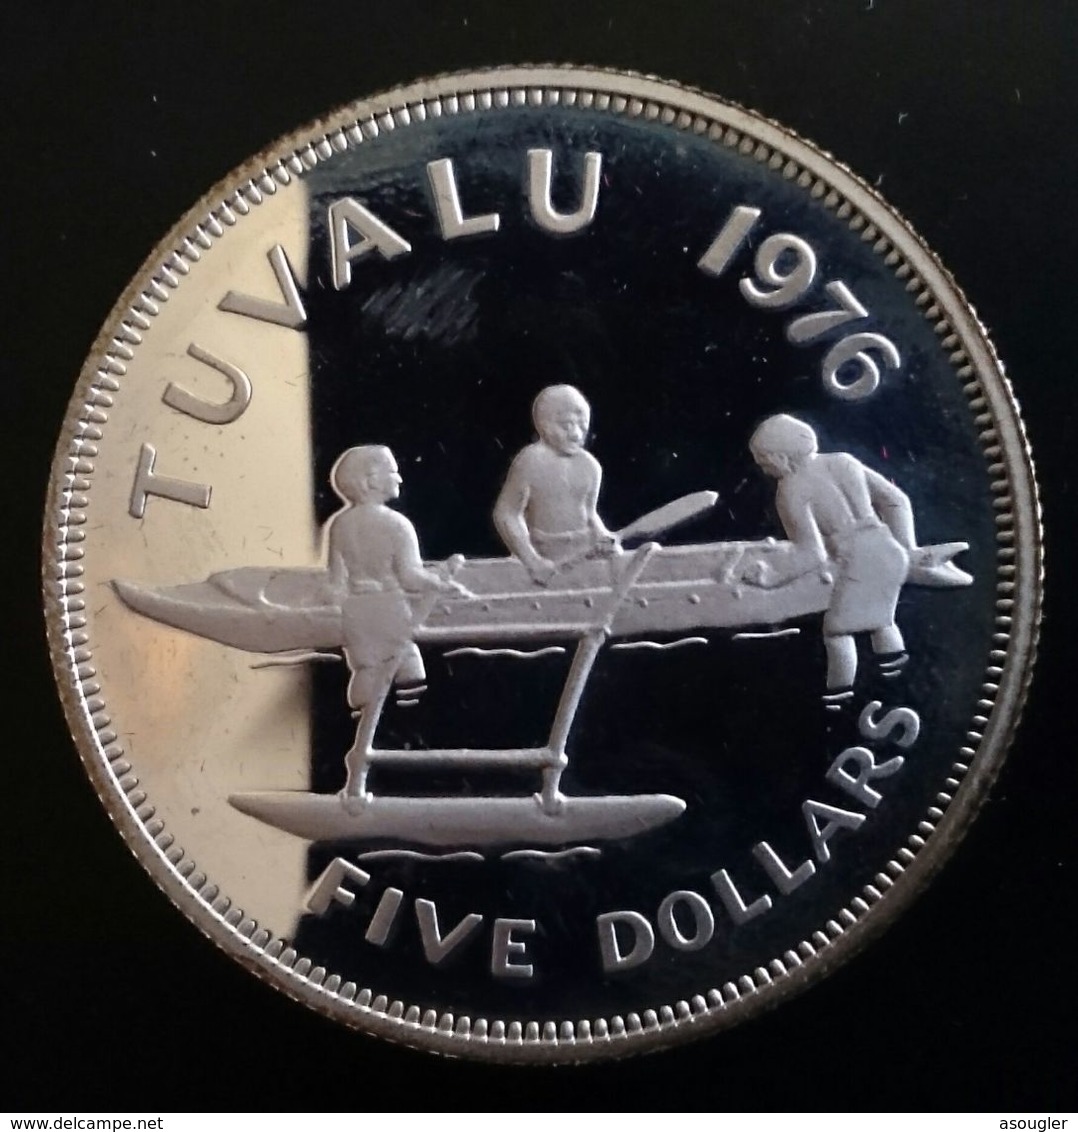 Tuvalu - TUVALU 5 DOLLARS 1976 SILVER PROOF Young bust right